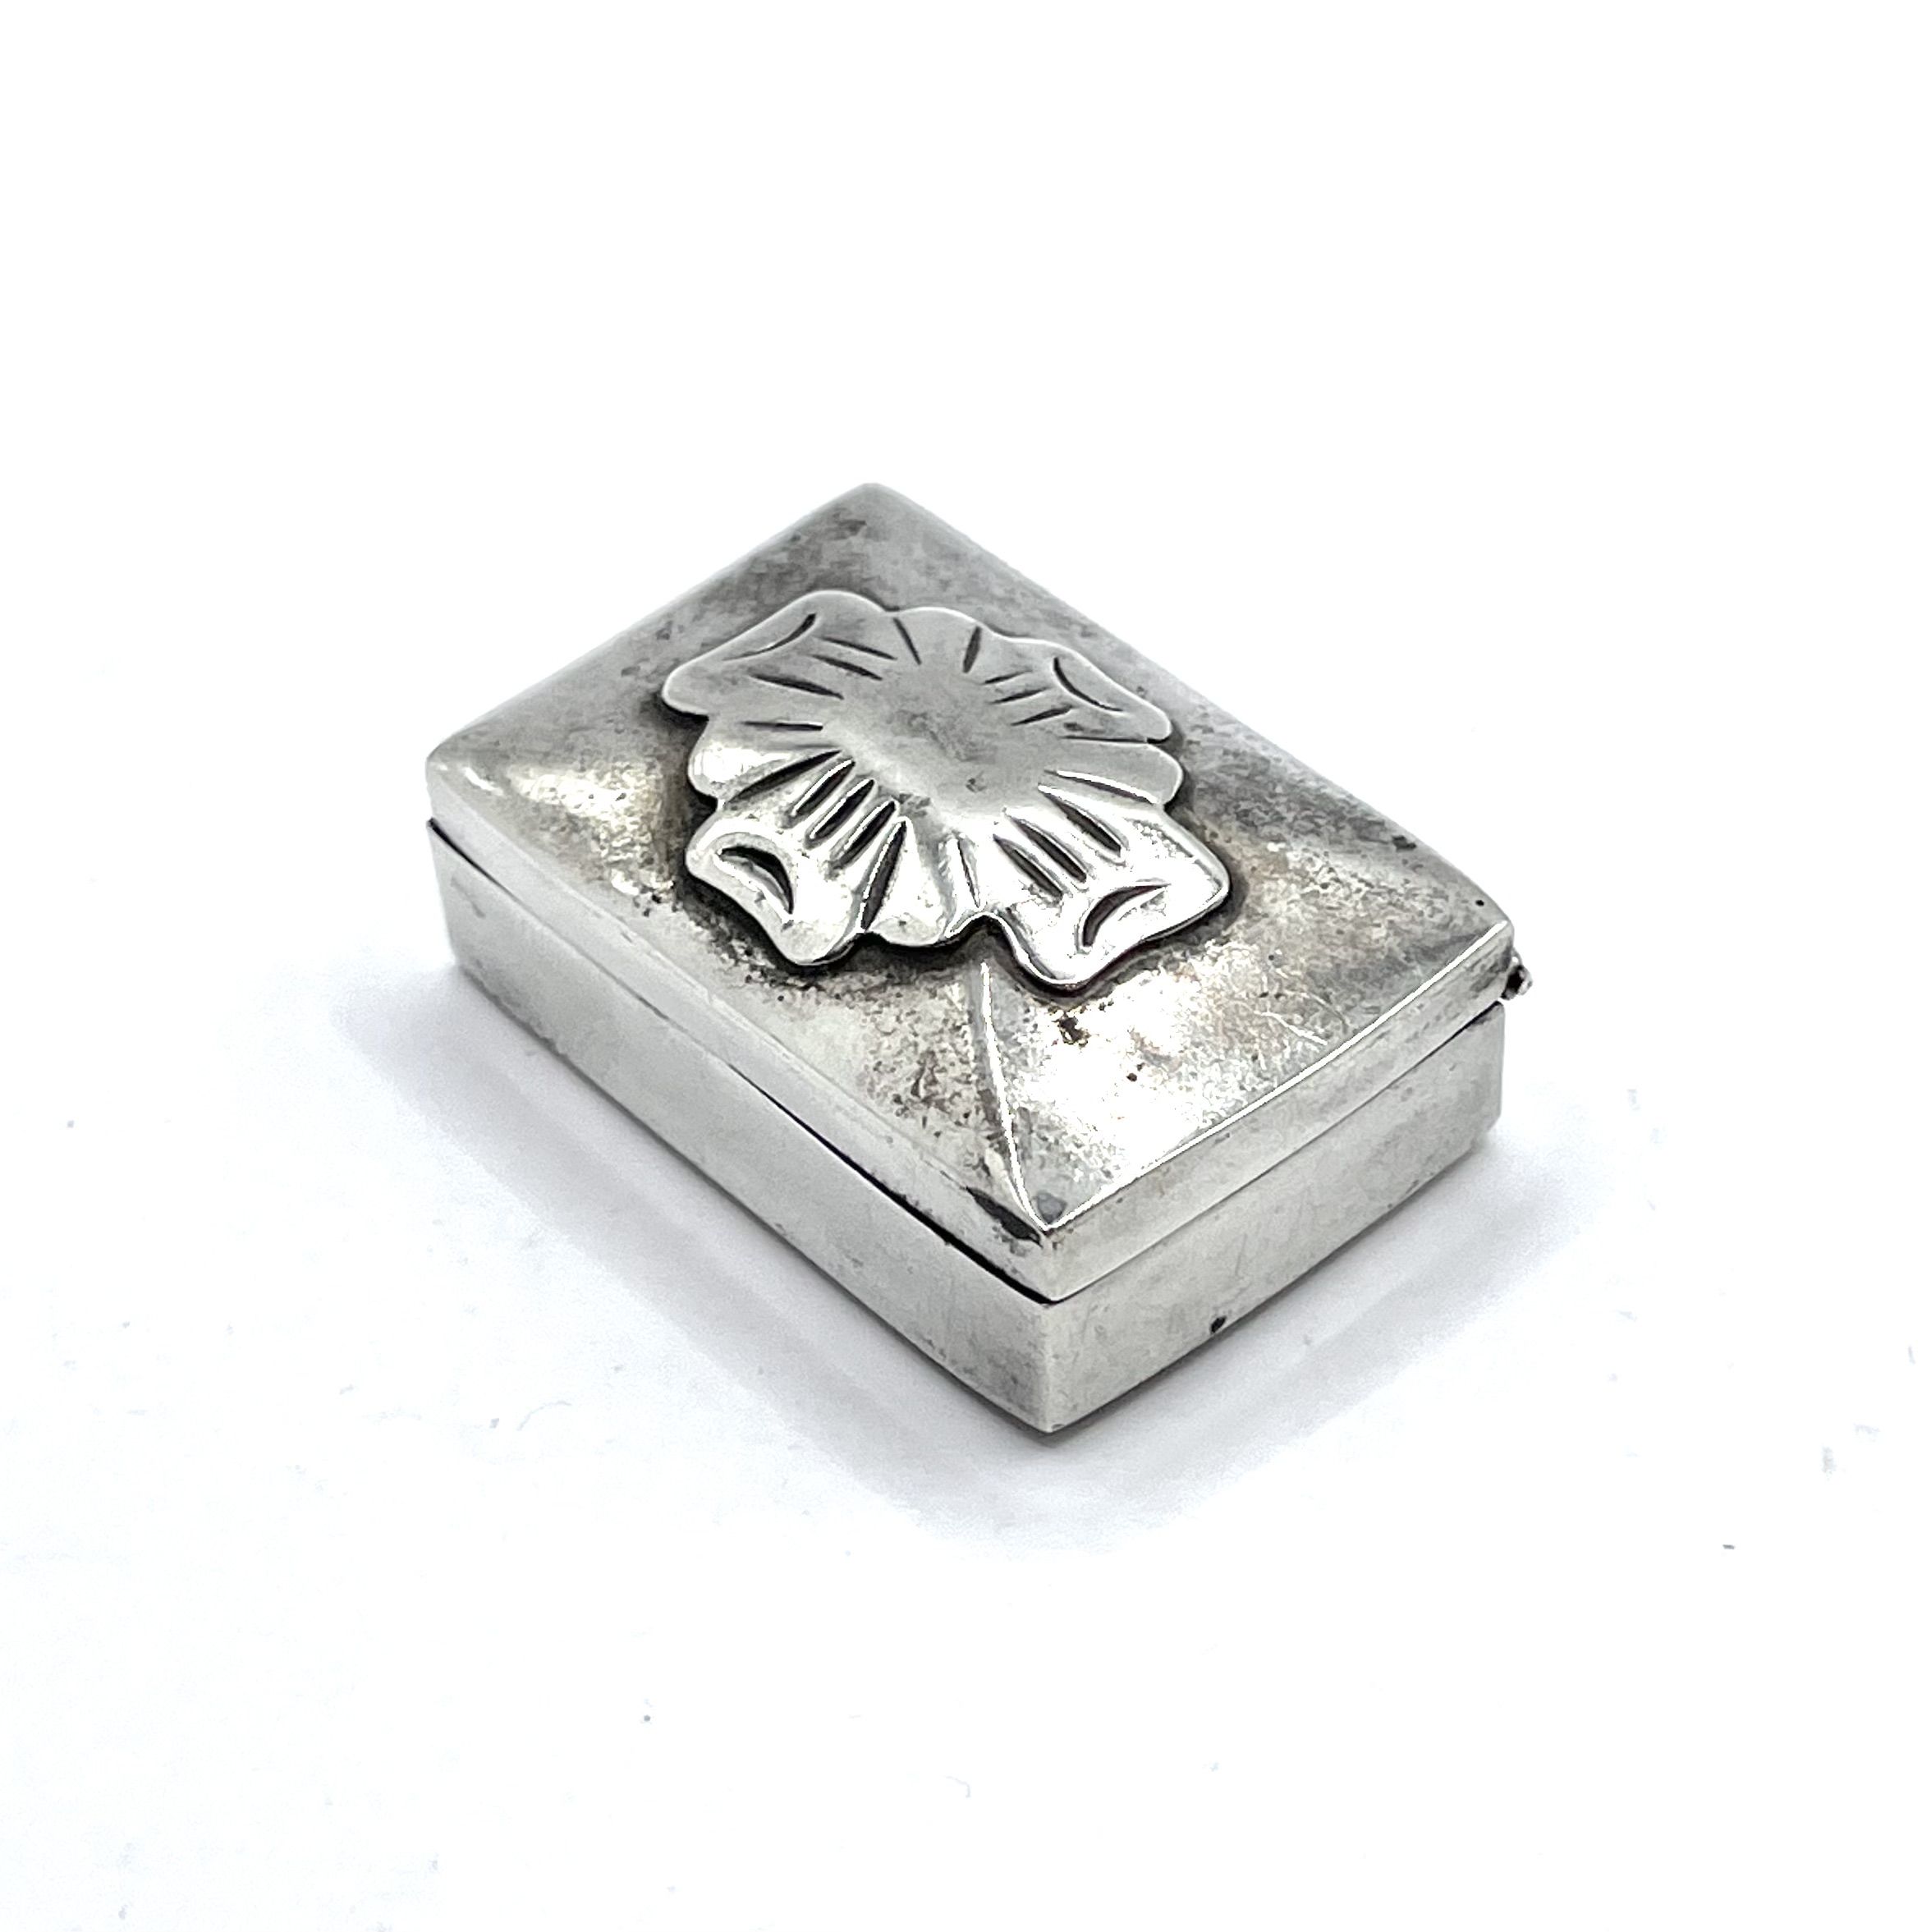 Vintage sterling silver pill box